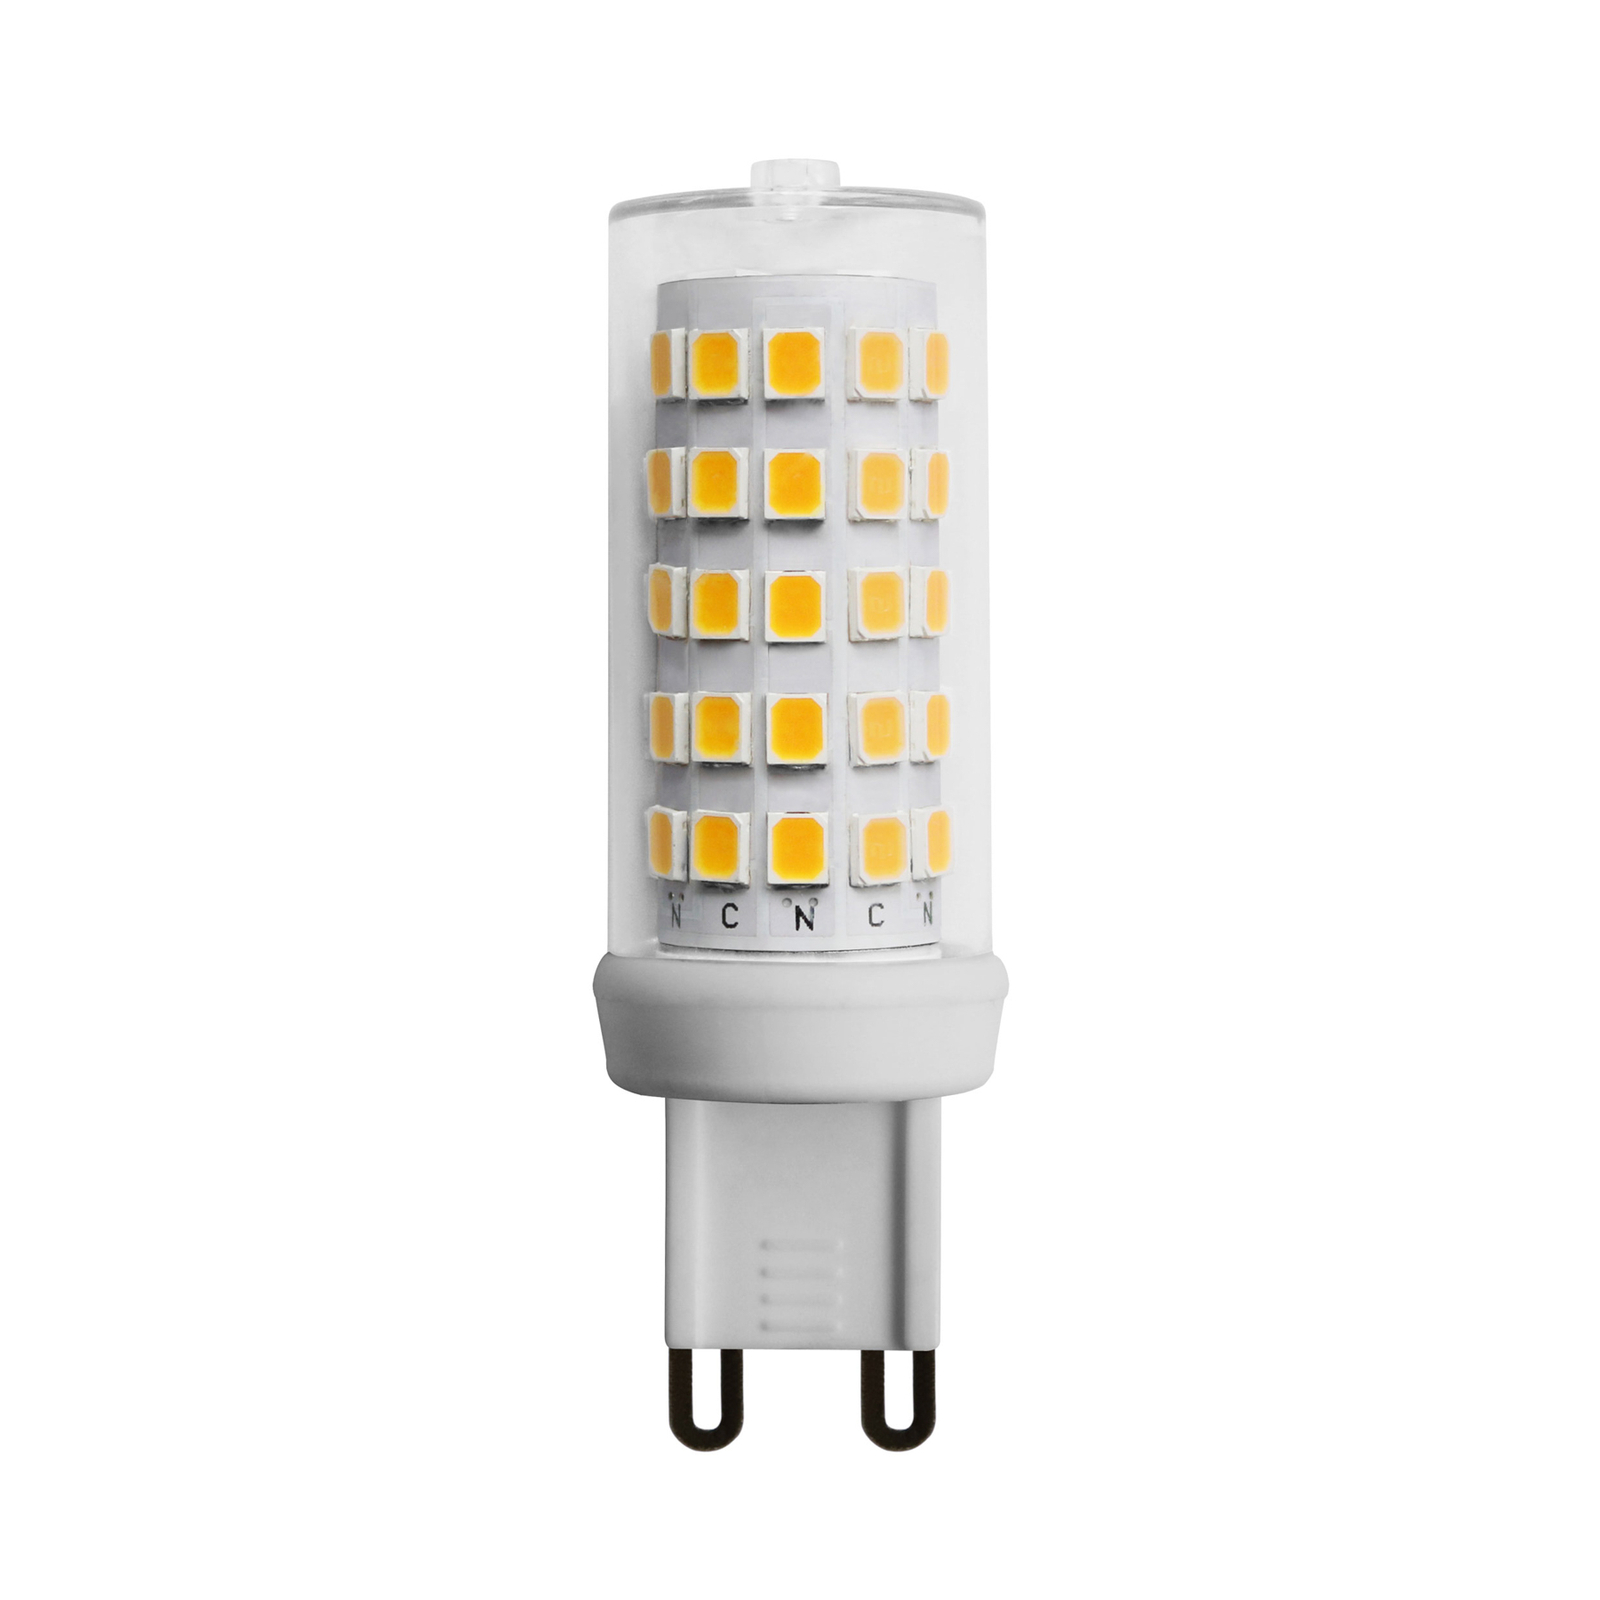 Arcchio LED bulb G9, 4 W, 3000 K, dimmable to warm